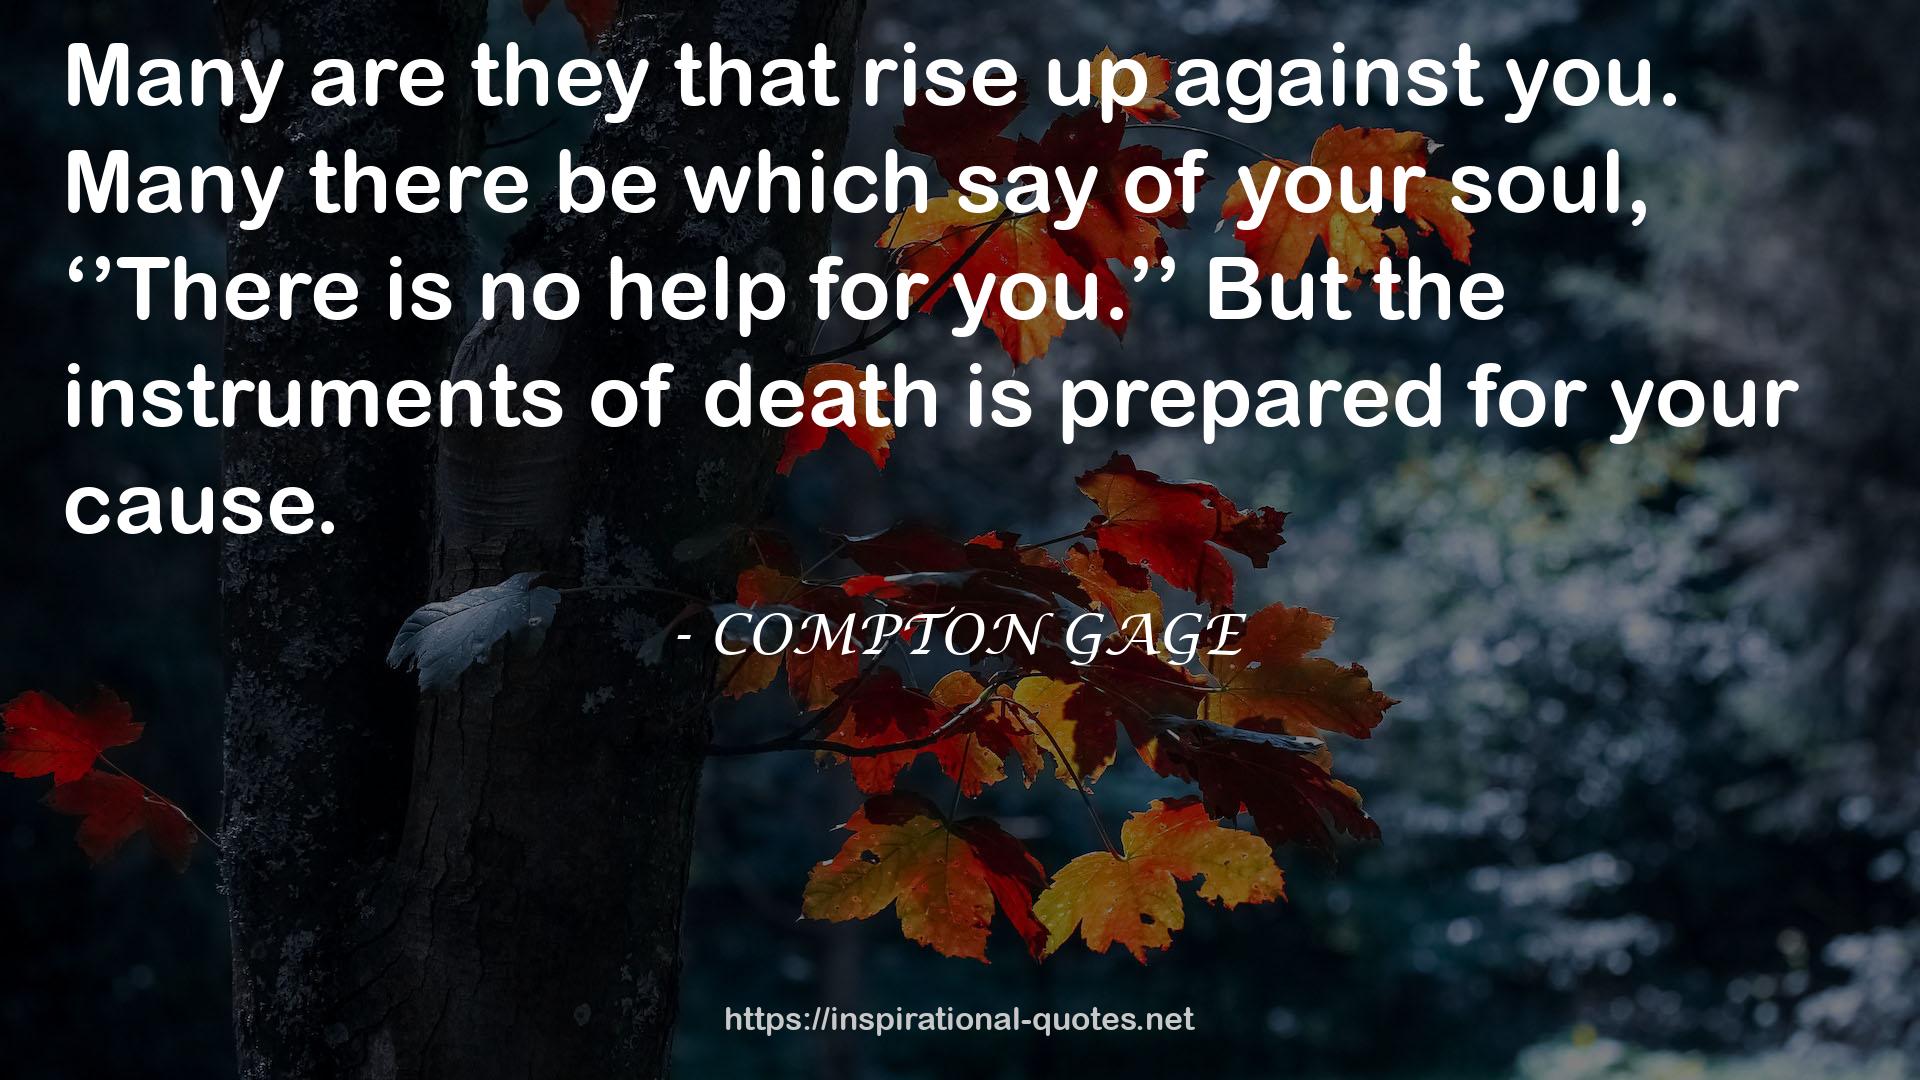 COMPTON GAGE QUOTES